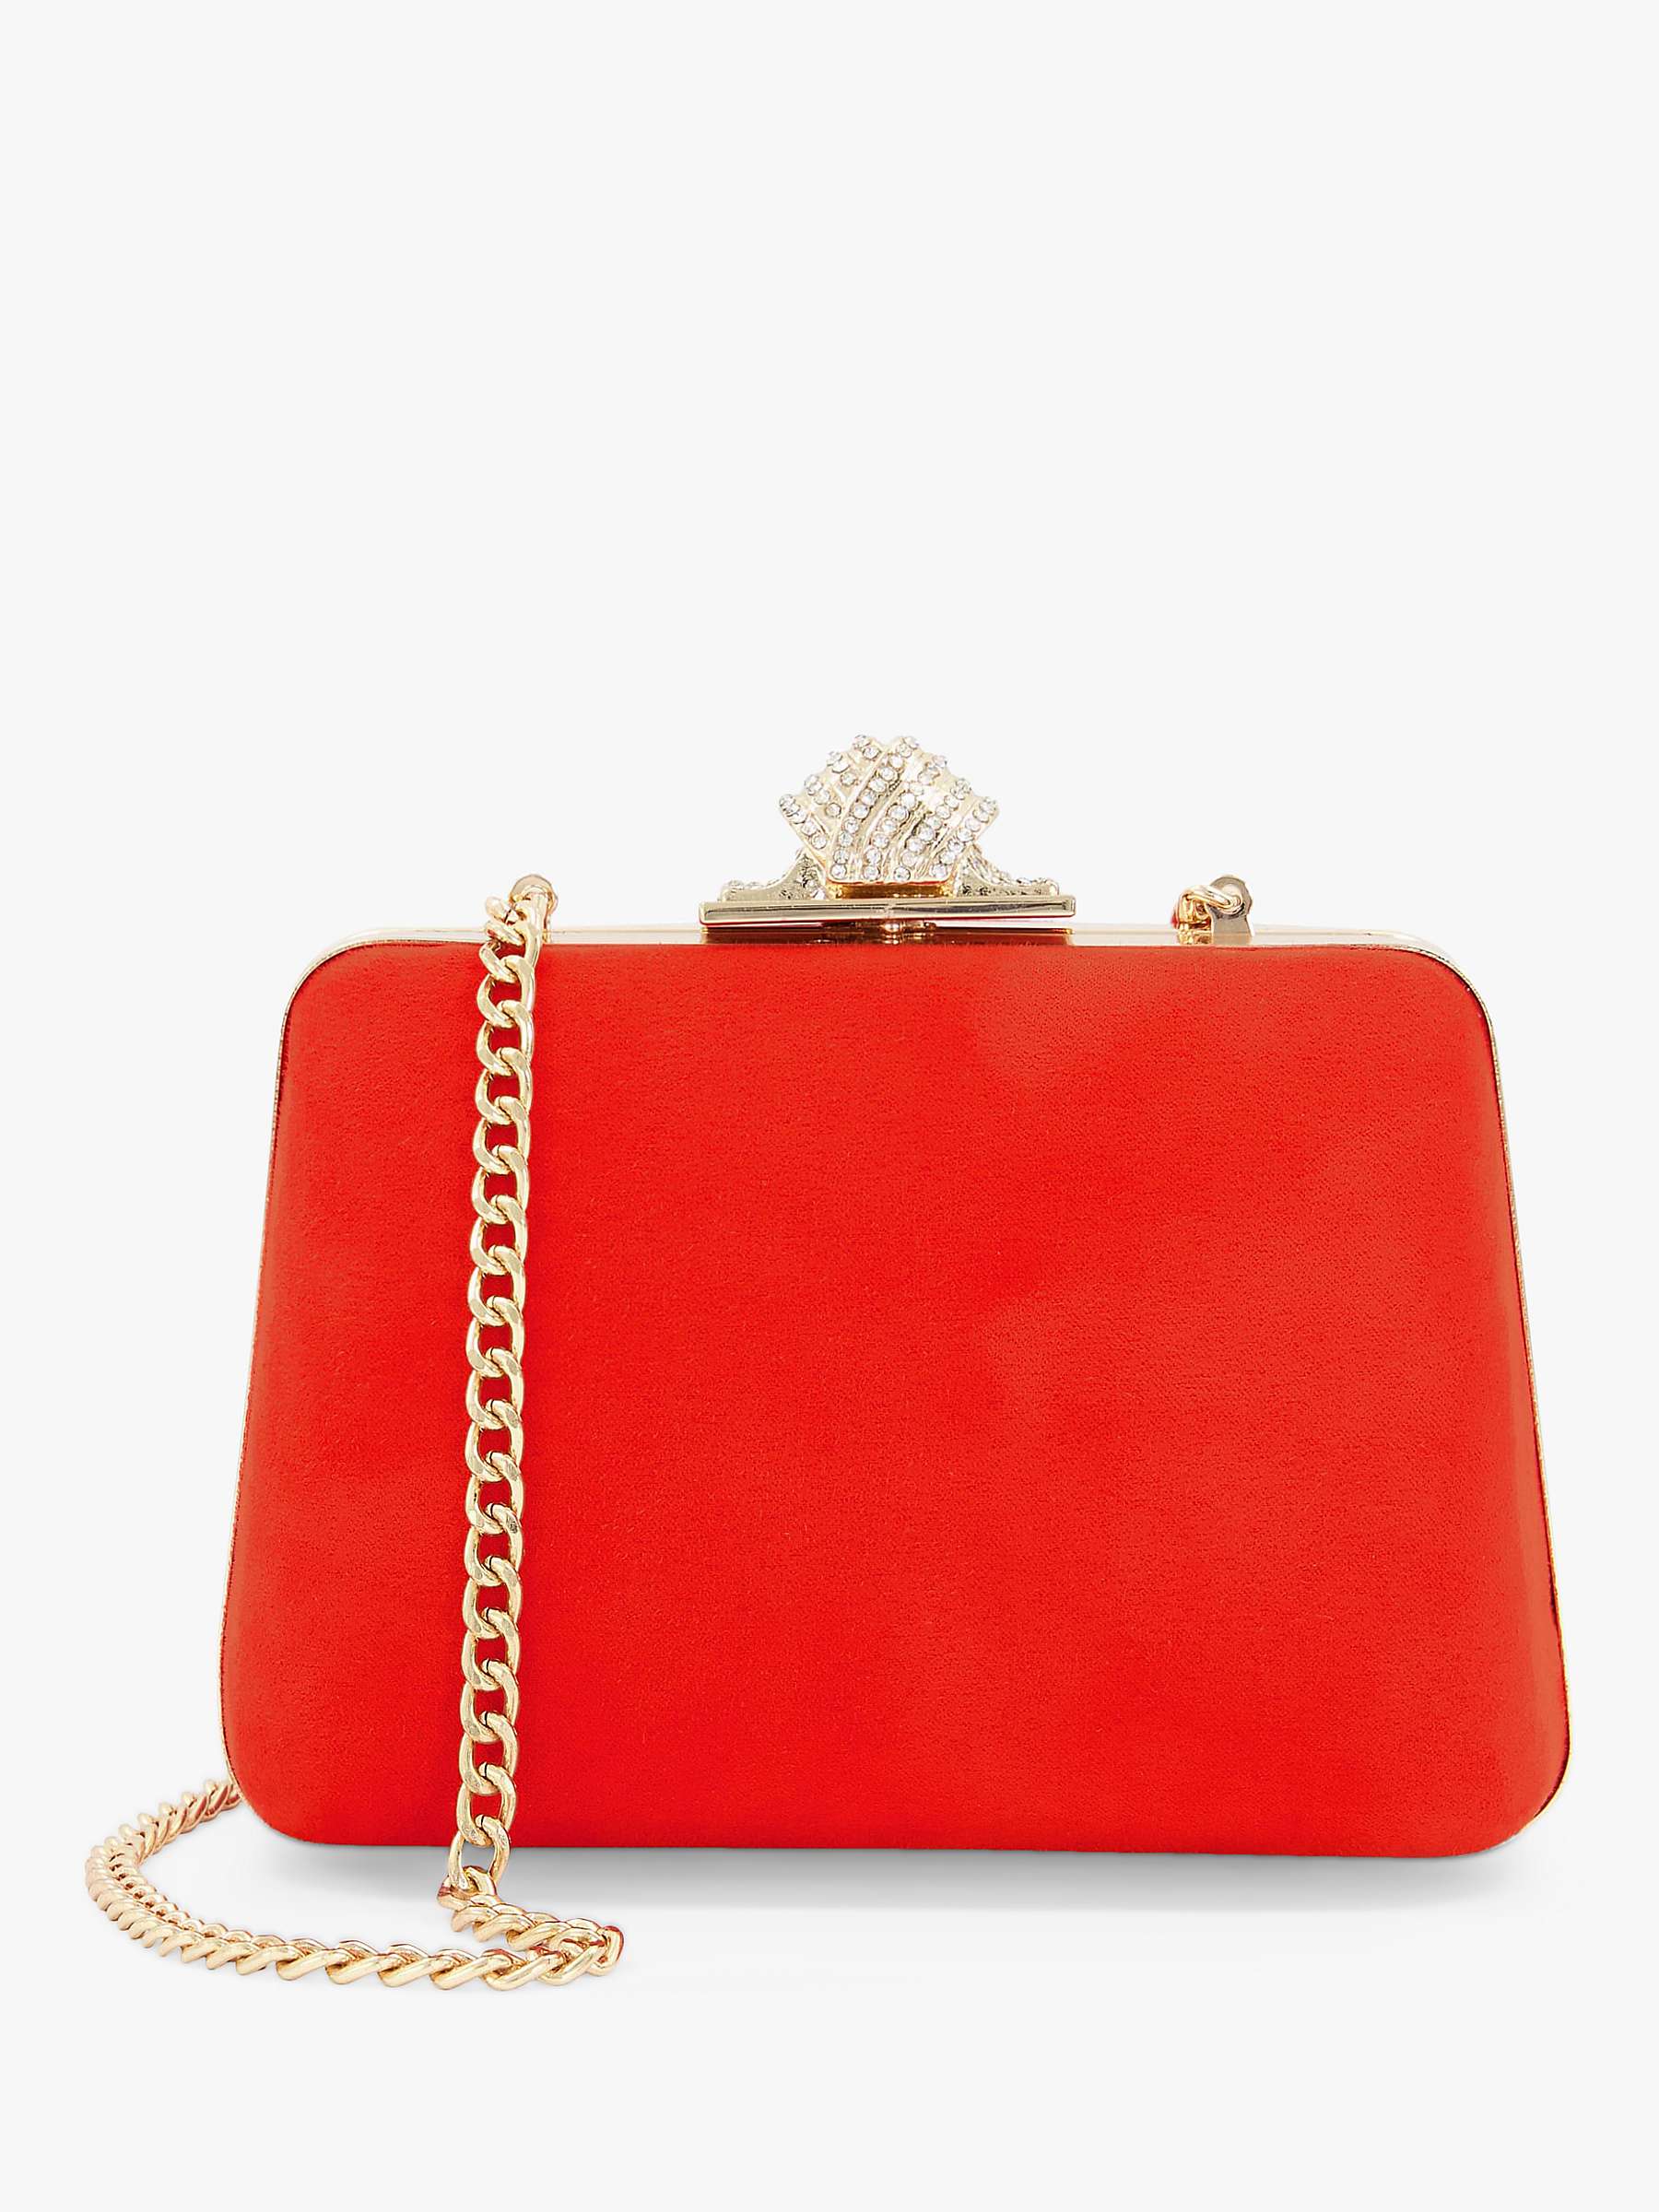 Dune Become Chain Strap Clutch Bag, Orange at John Lewis & Partners